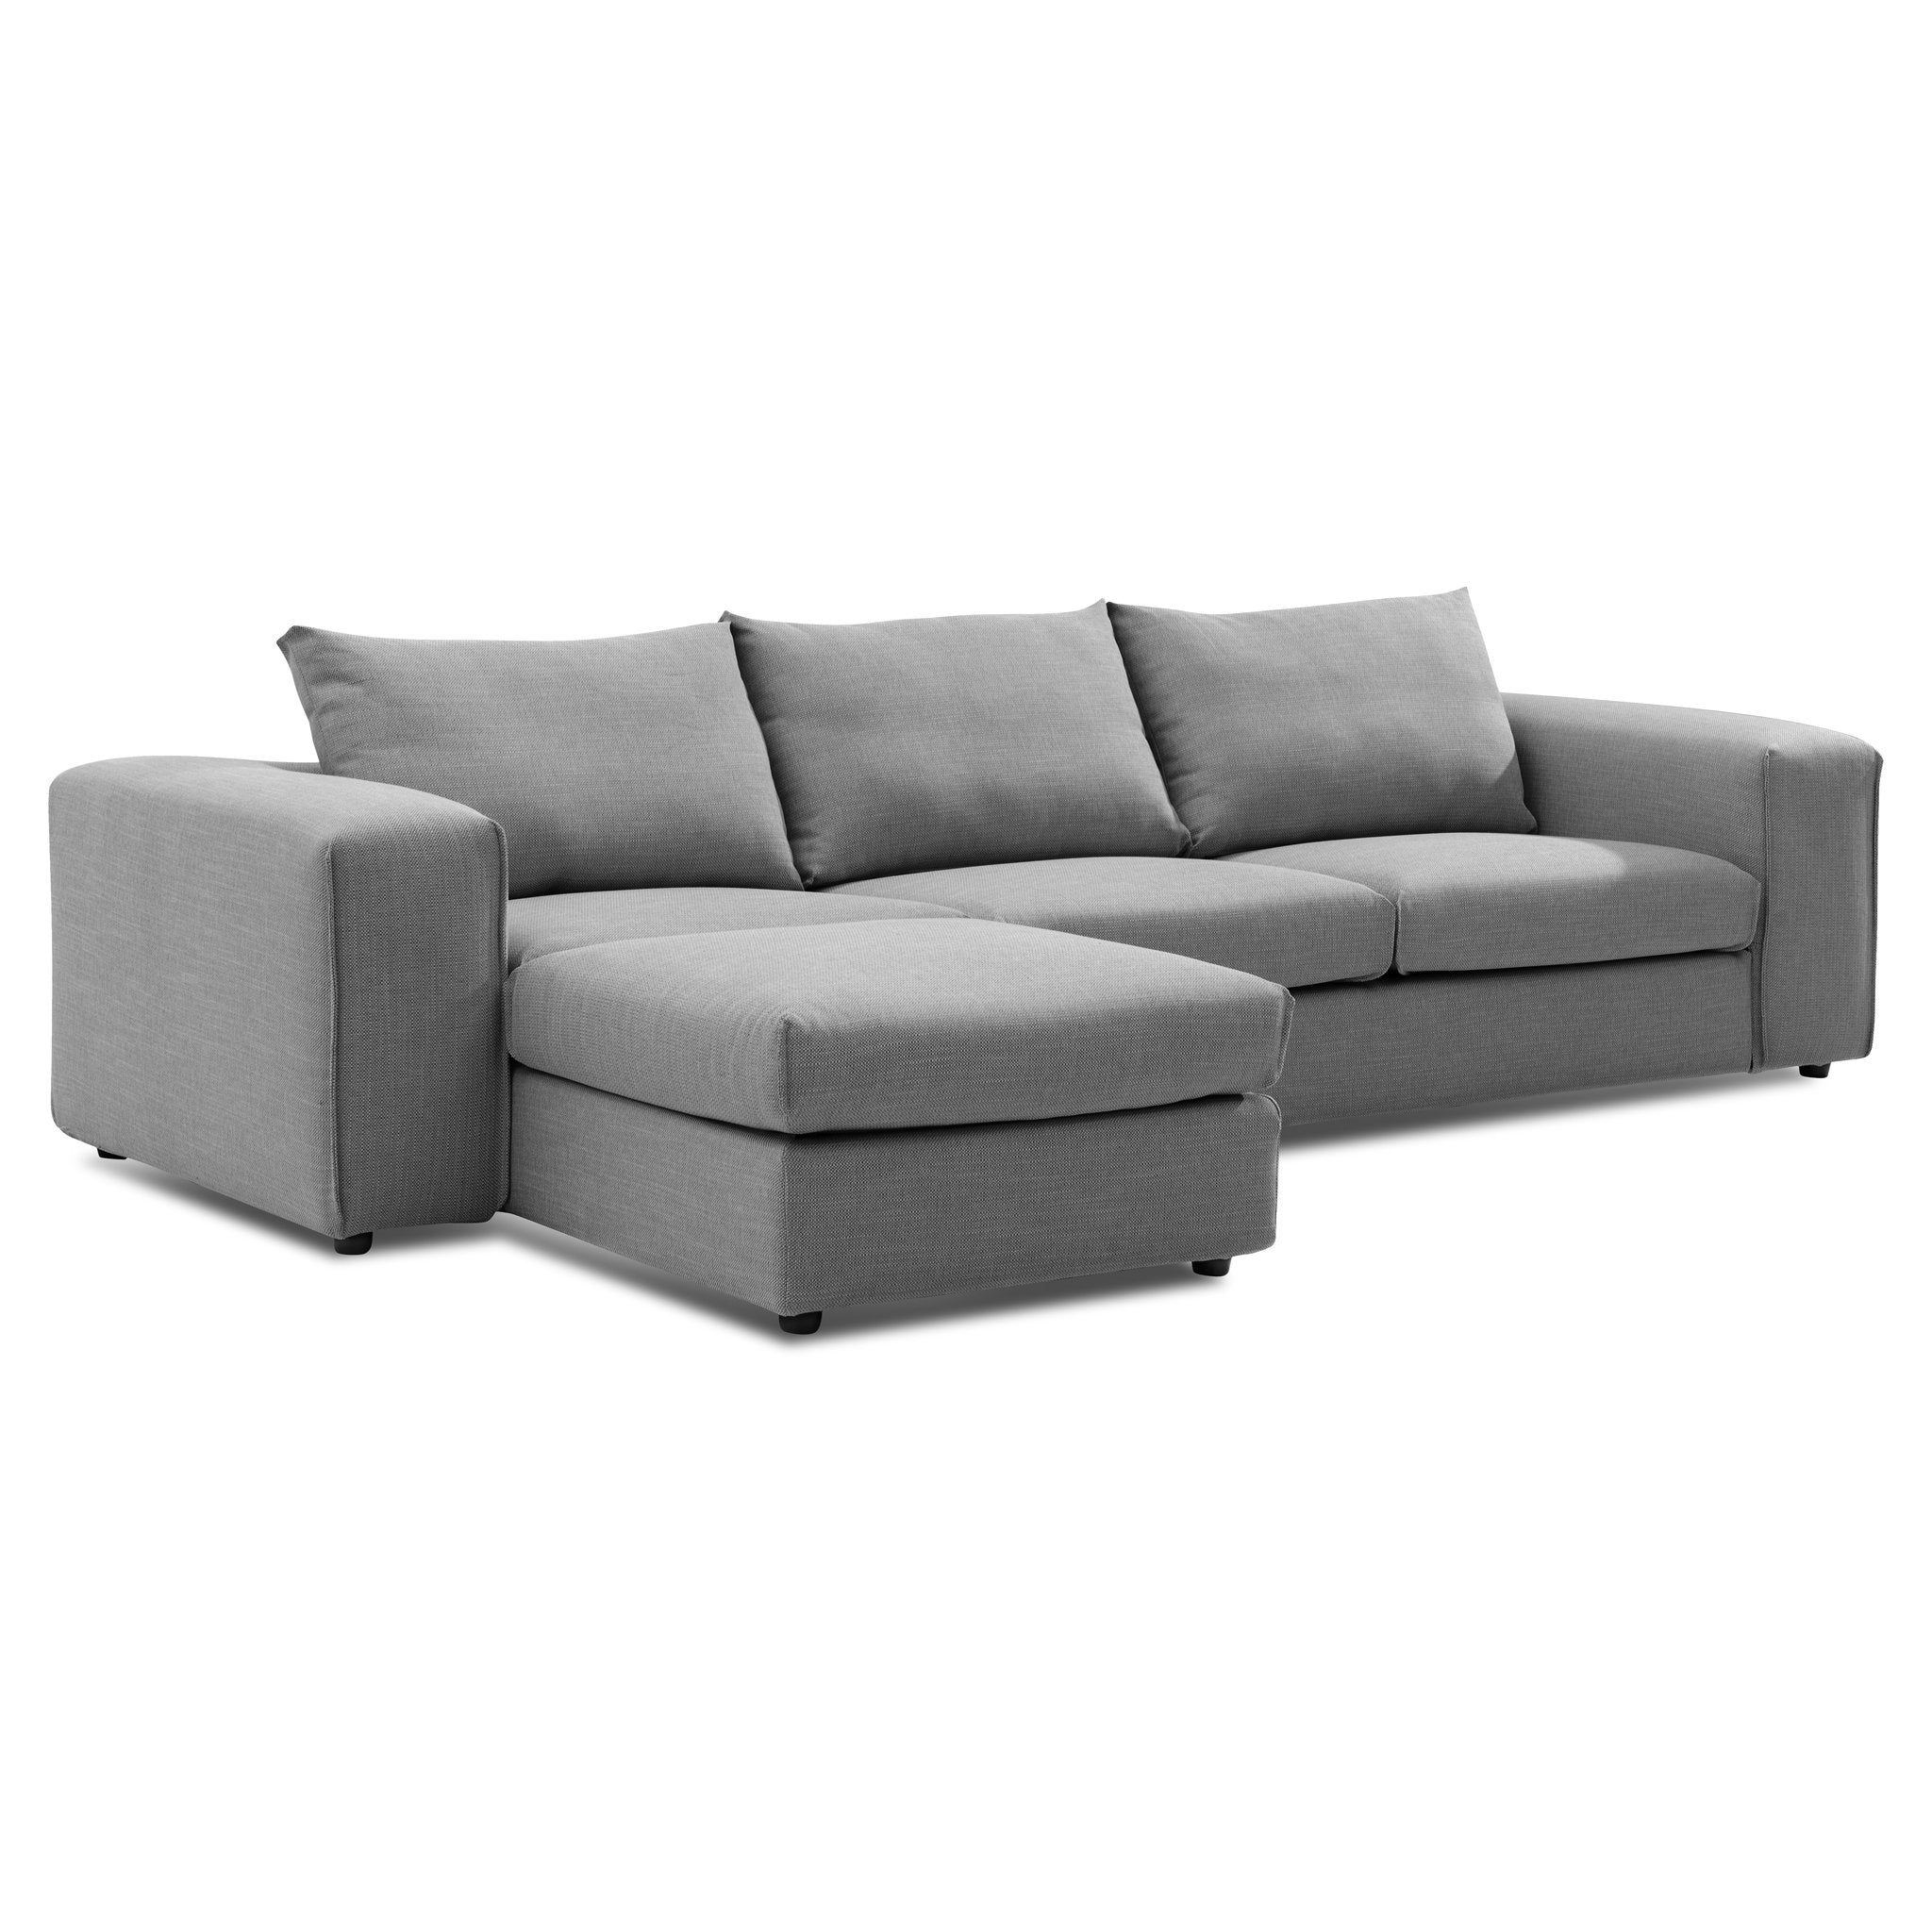 Eleanor 4 Seater Left Chaise Sofa with Ottoman - Graphite Grey